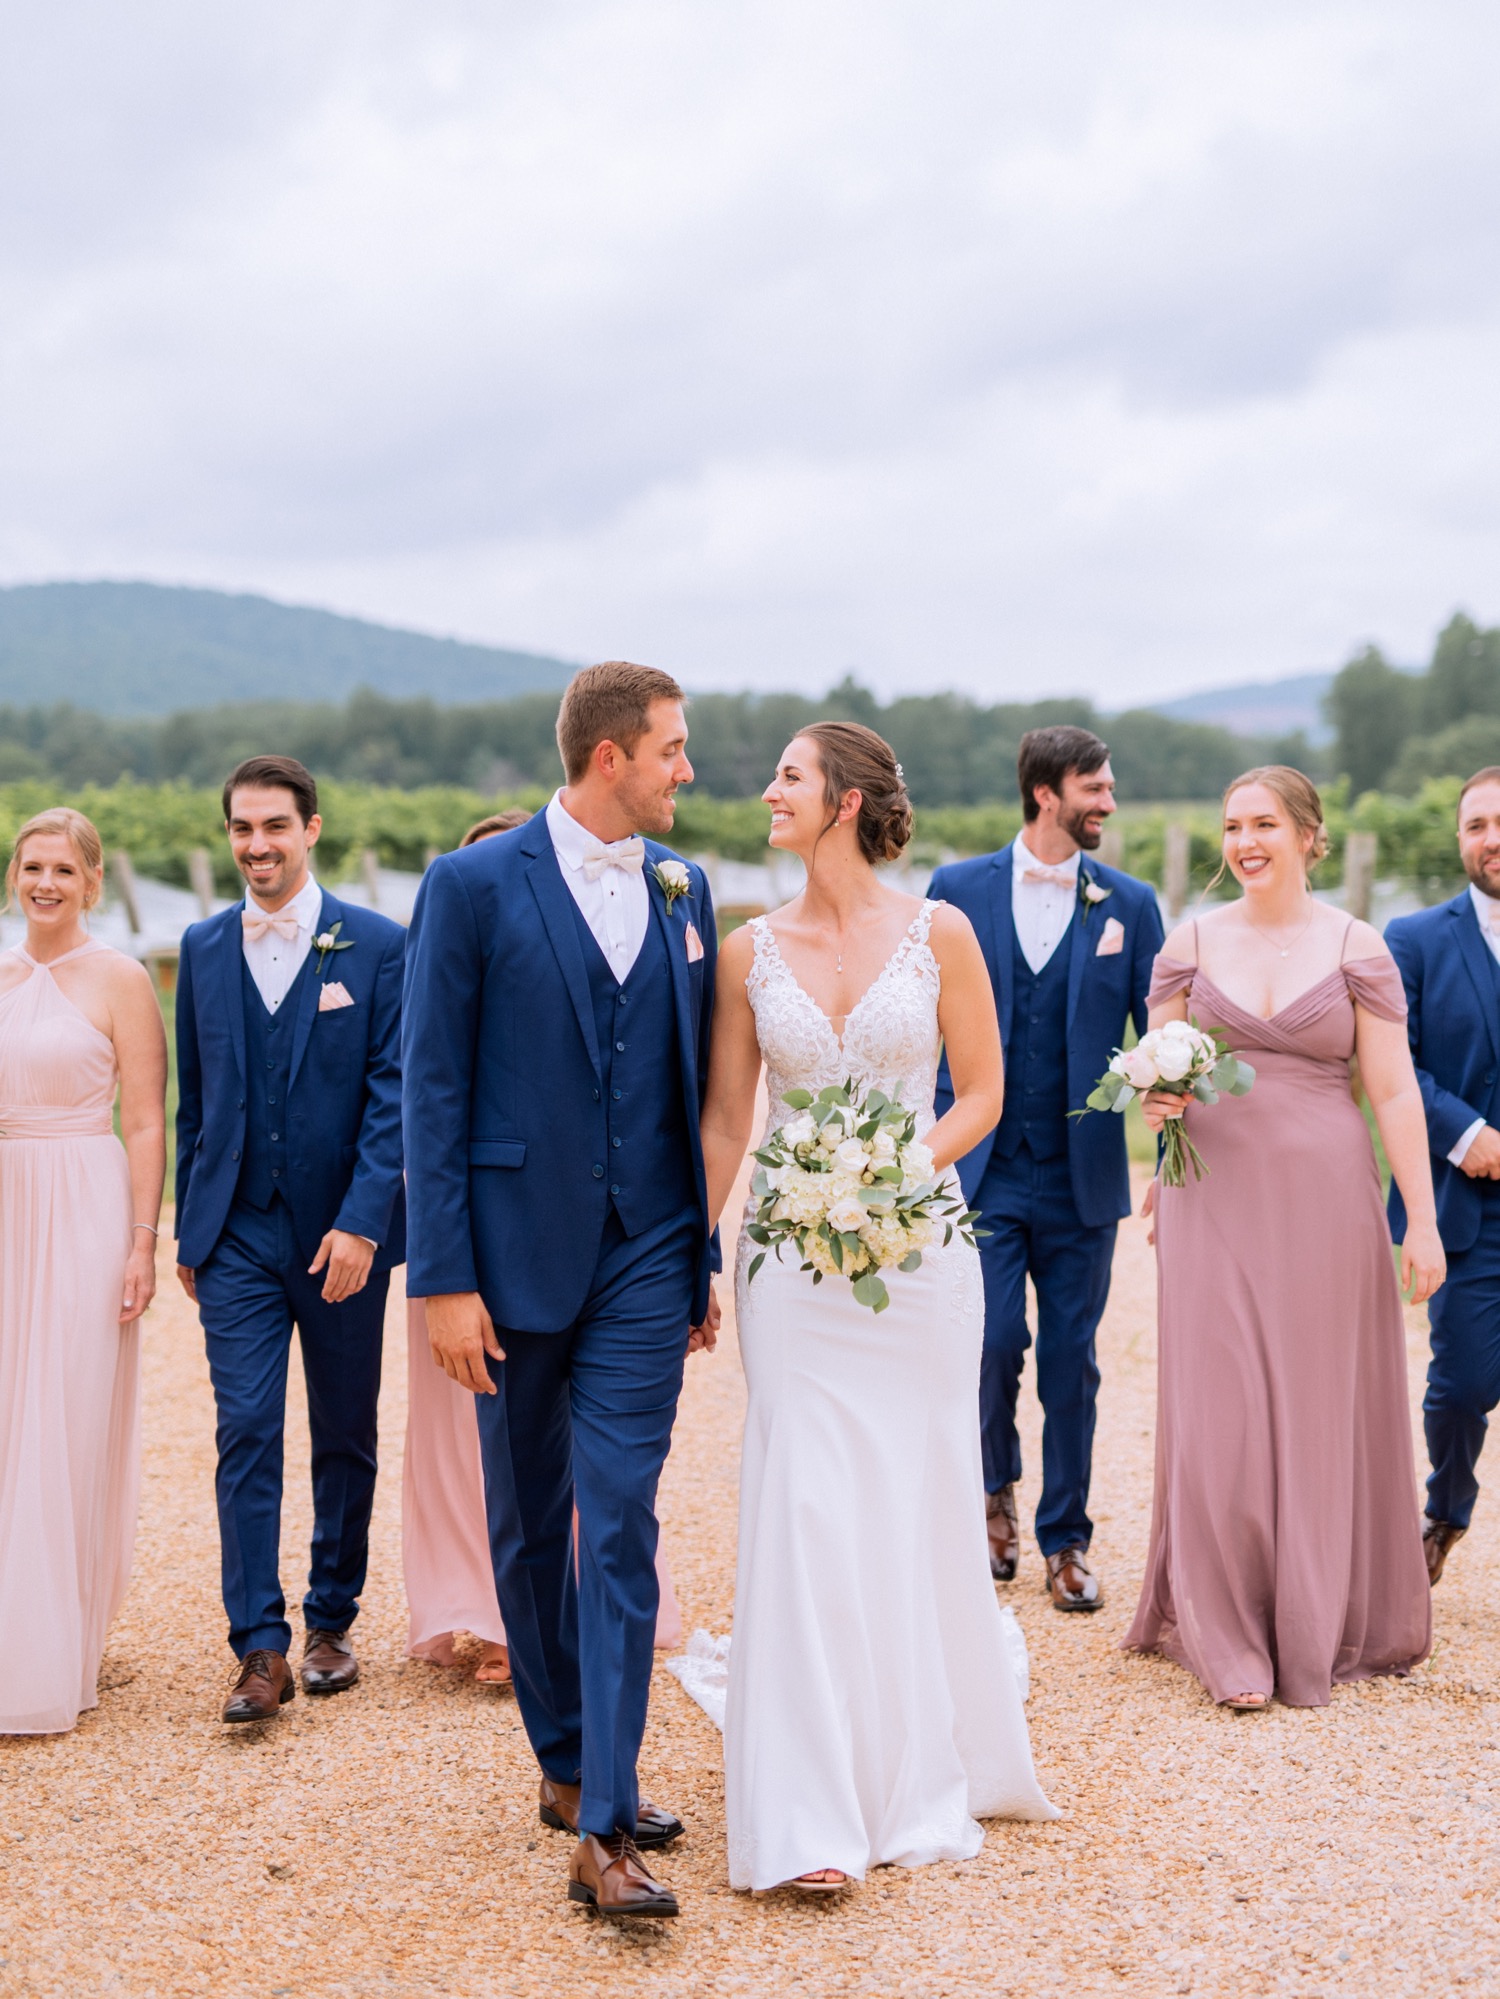 entire wedding party wearing light pink and purple dresses and navy blue tuxes posing and walking with the bride and groom on their wedding day